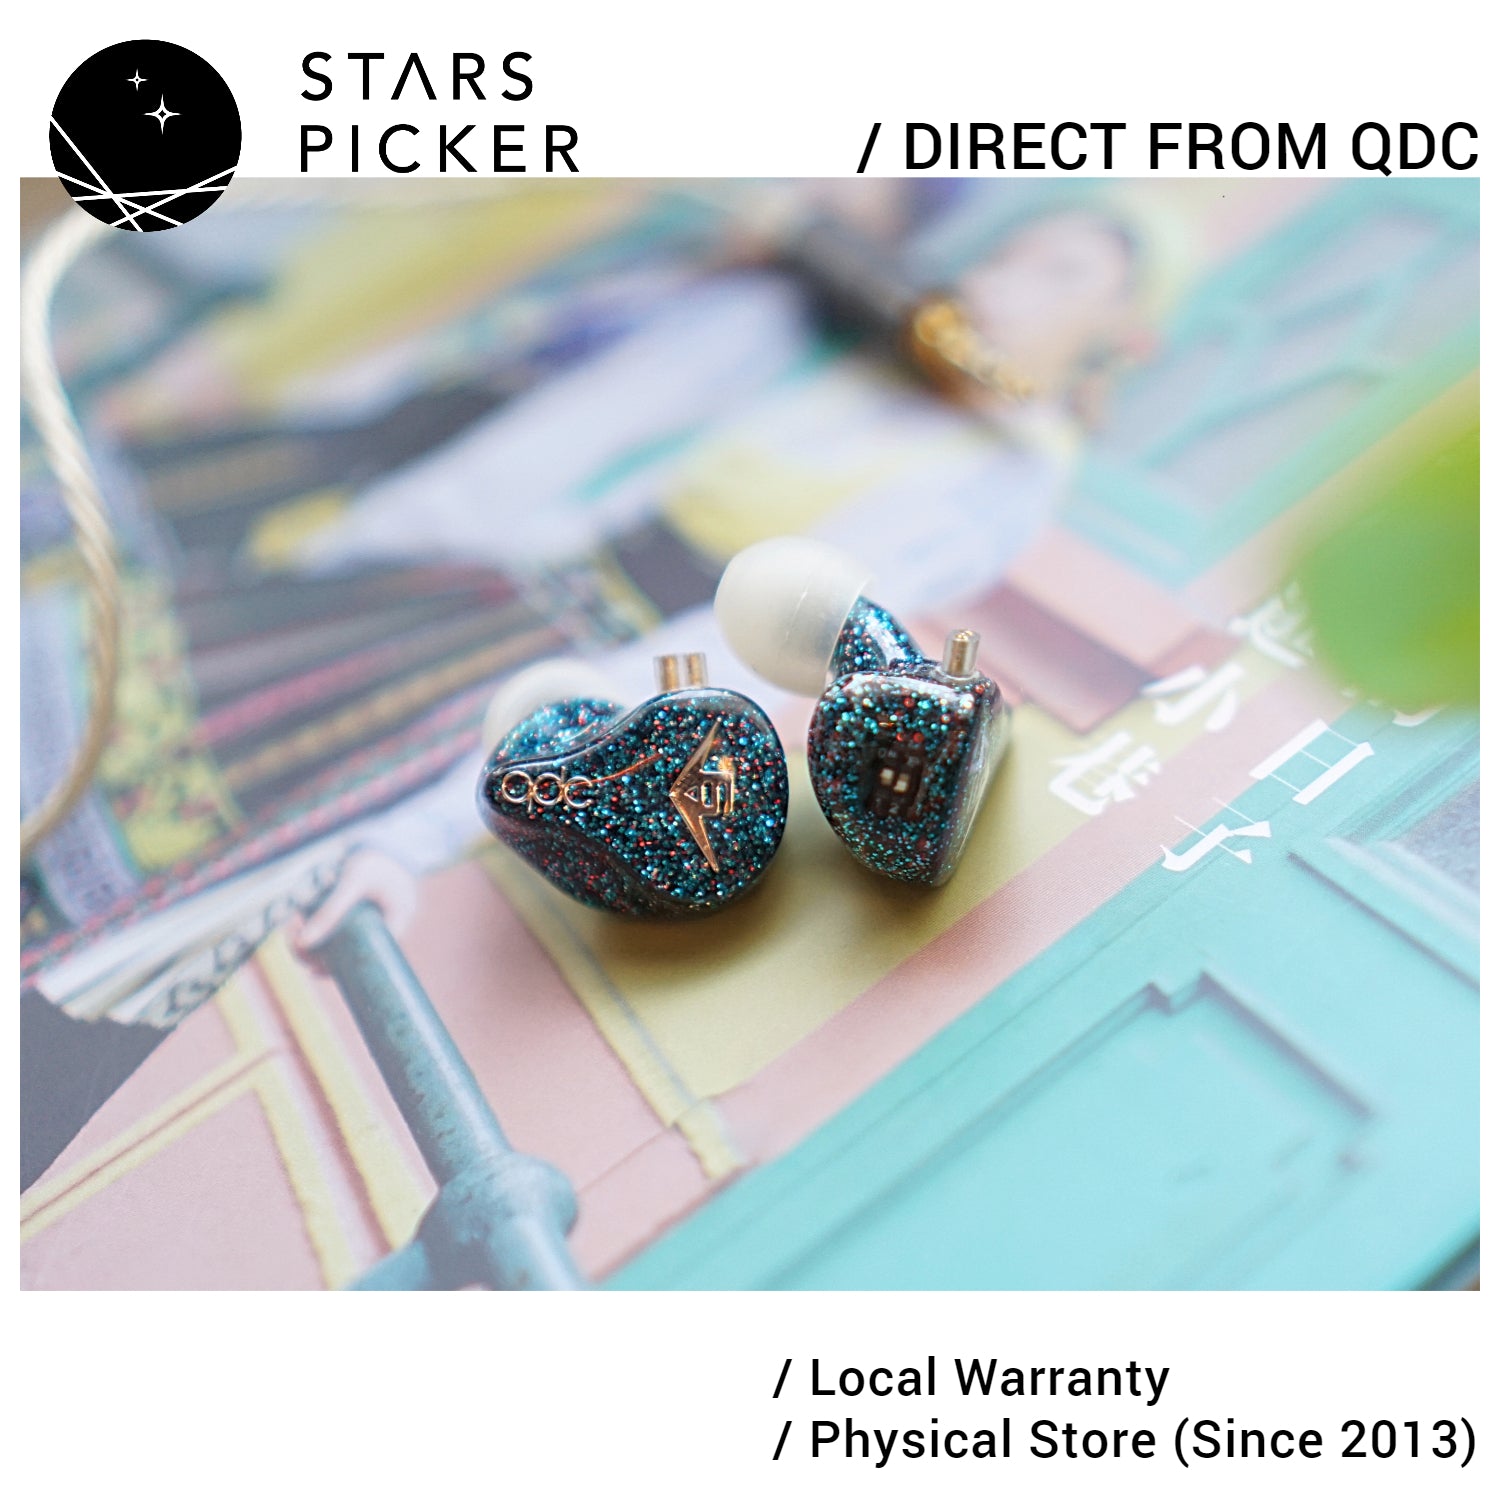 QDC Anole V6-S Standard / V6-C Custom - IEM Earphone 6 BA Drivers and Variable Tuning Switch